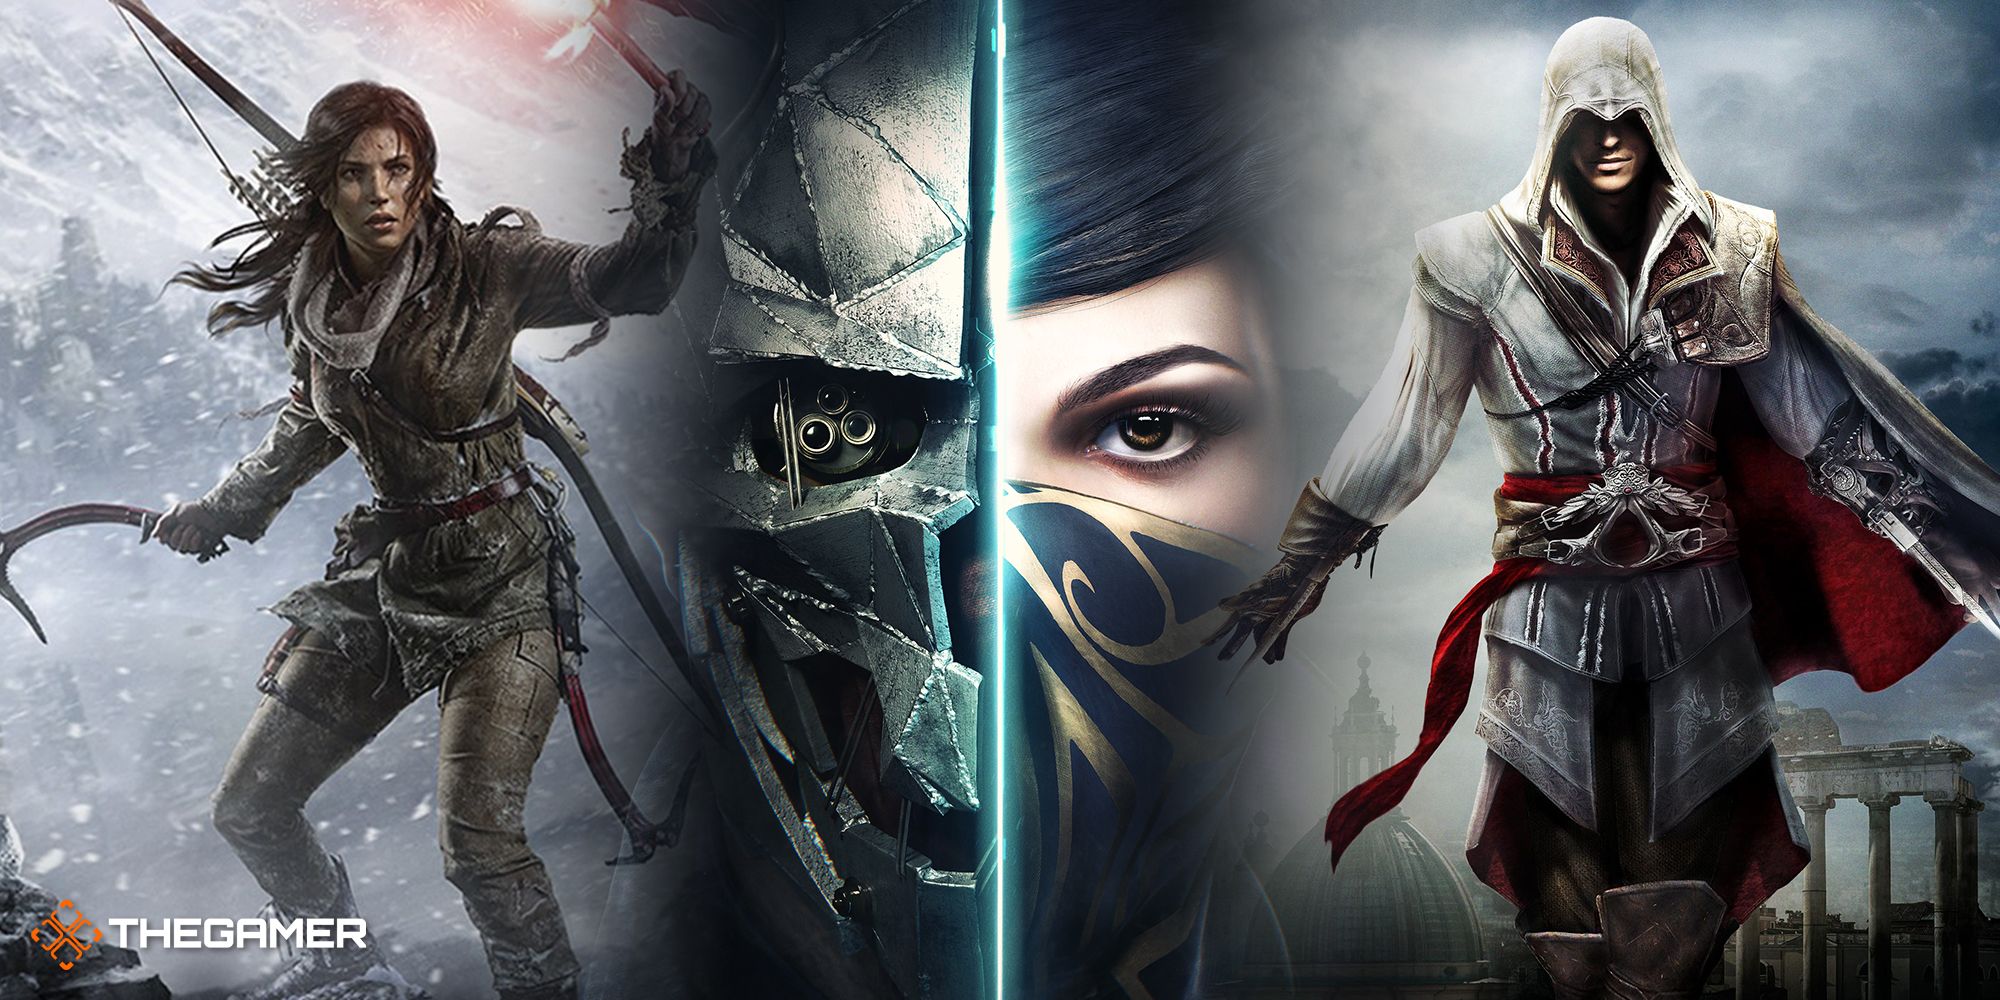 Game art from Assassin's Creed The Ezio Collection, Dishonored 2 and Rise Of The Tomb Raider.